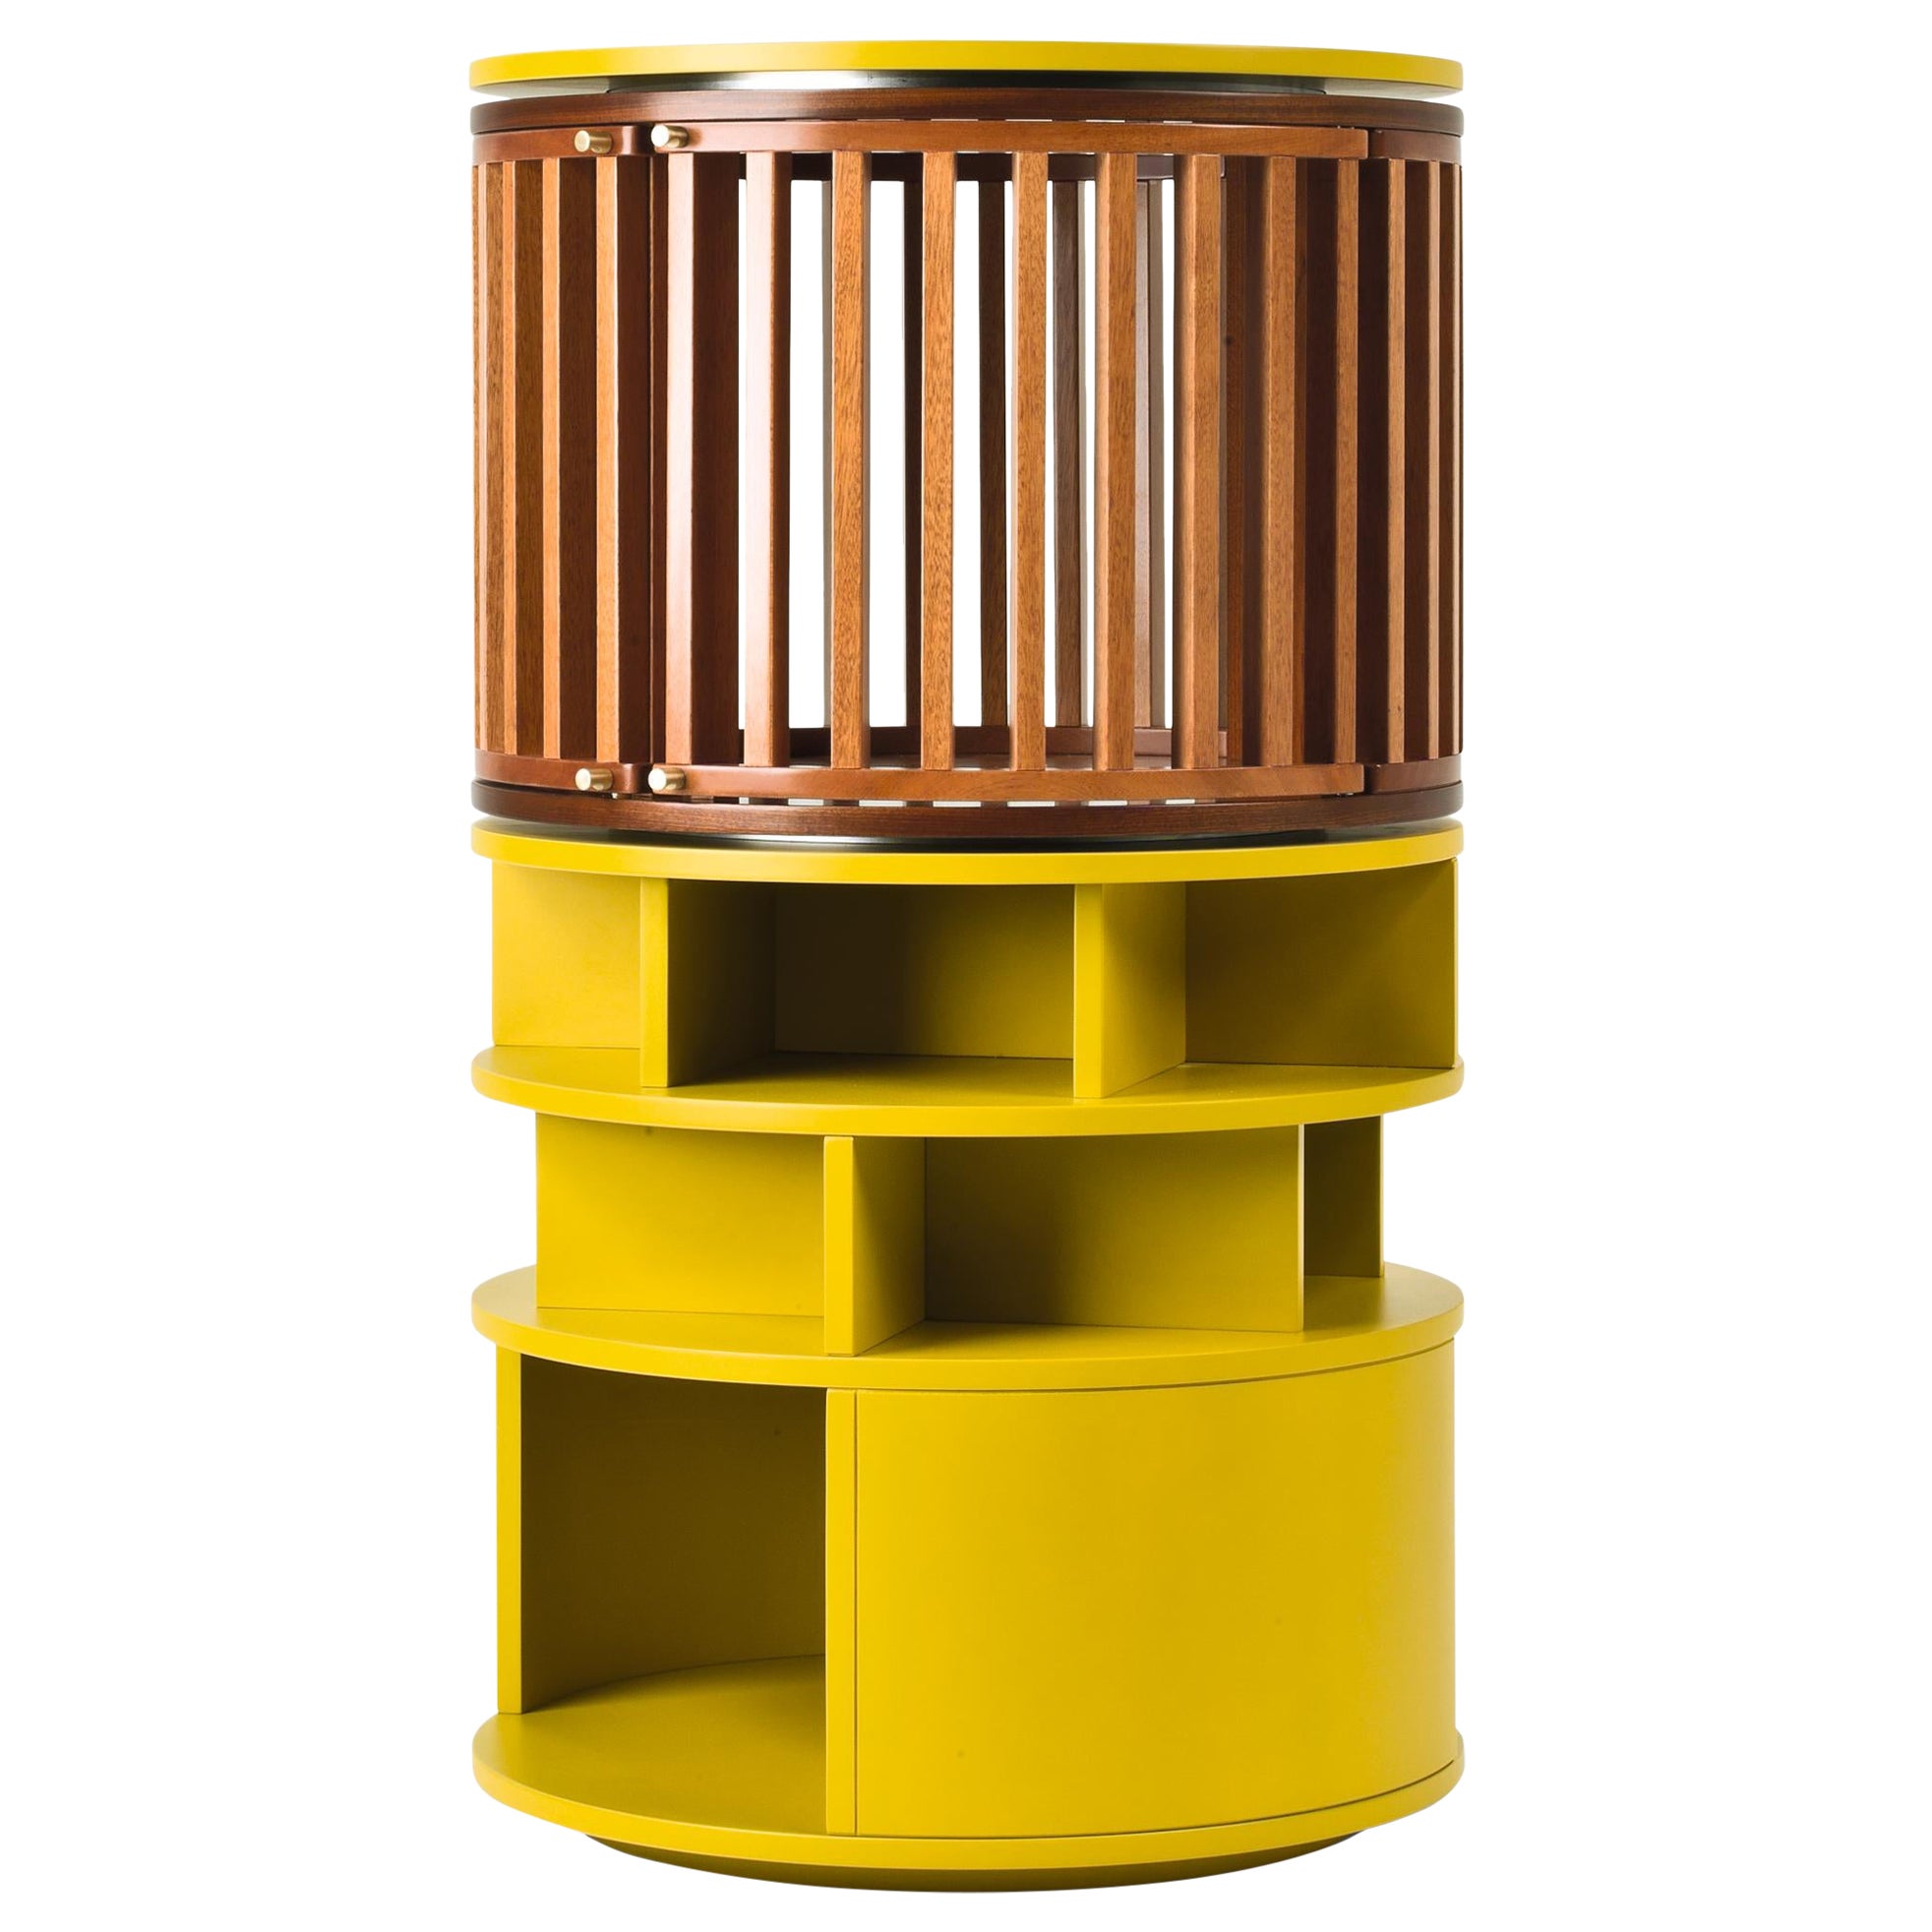 Babel Cylindrical Revolving Cabinet in natural Mahogany Finishing and Yellow